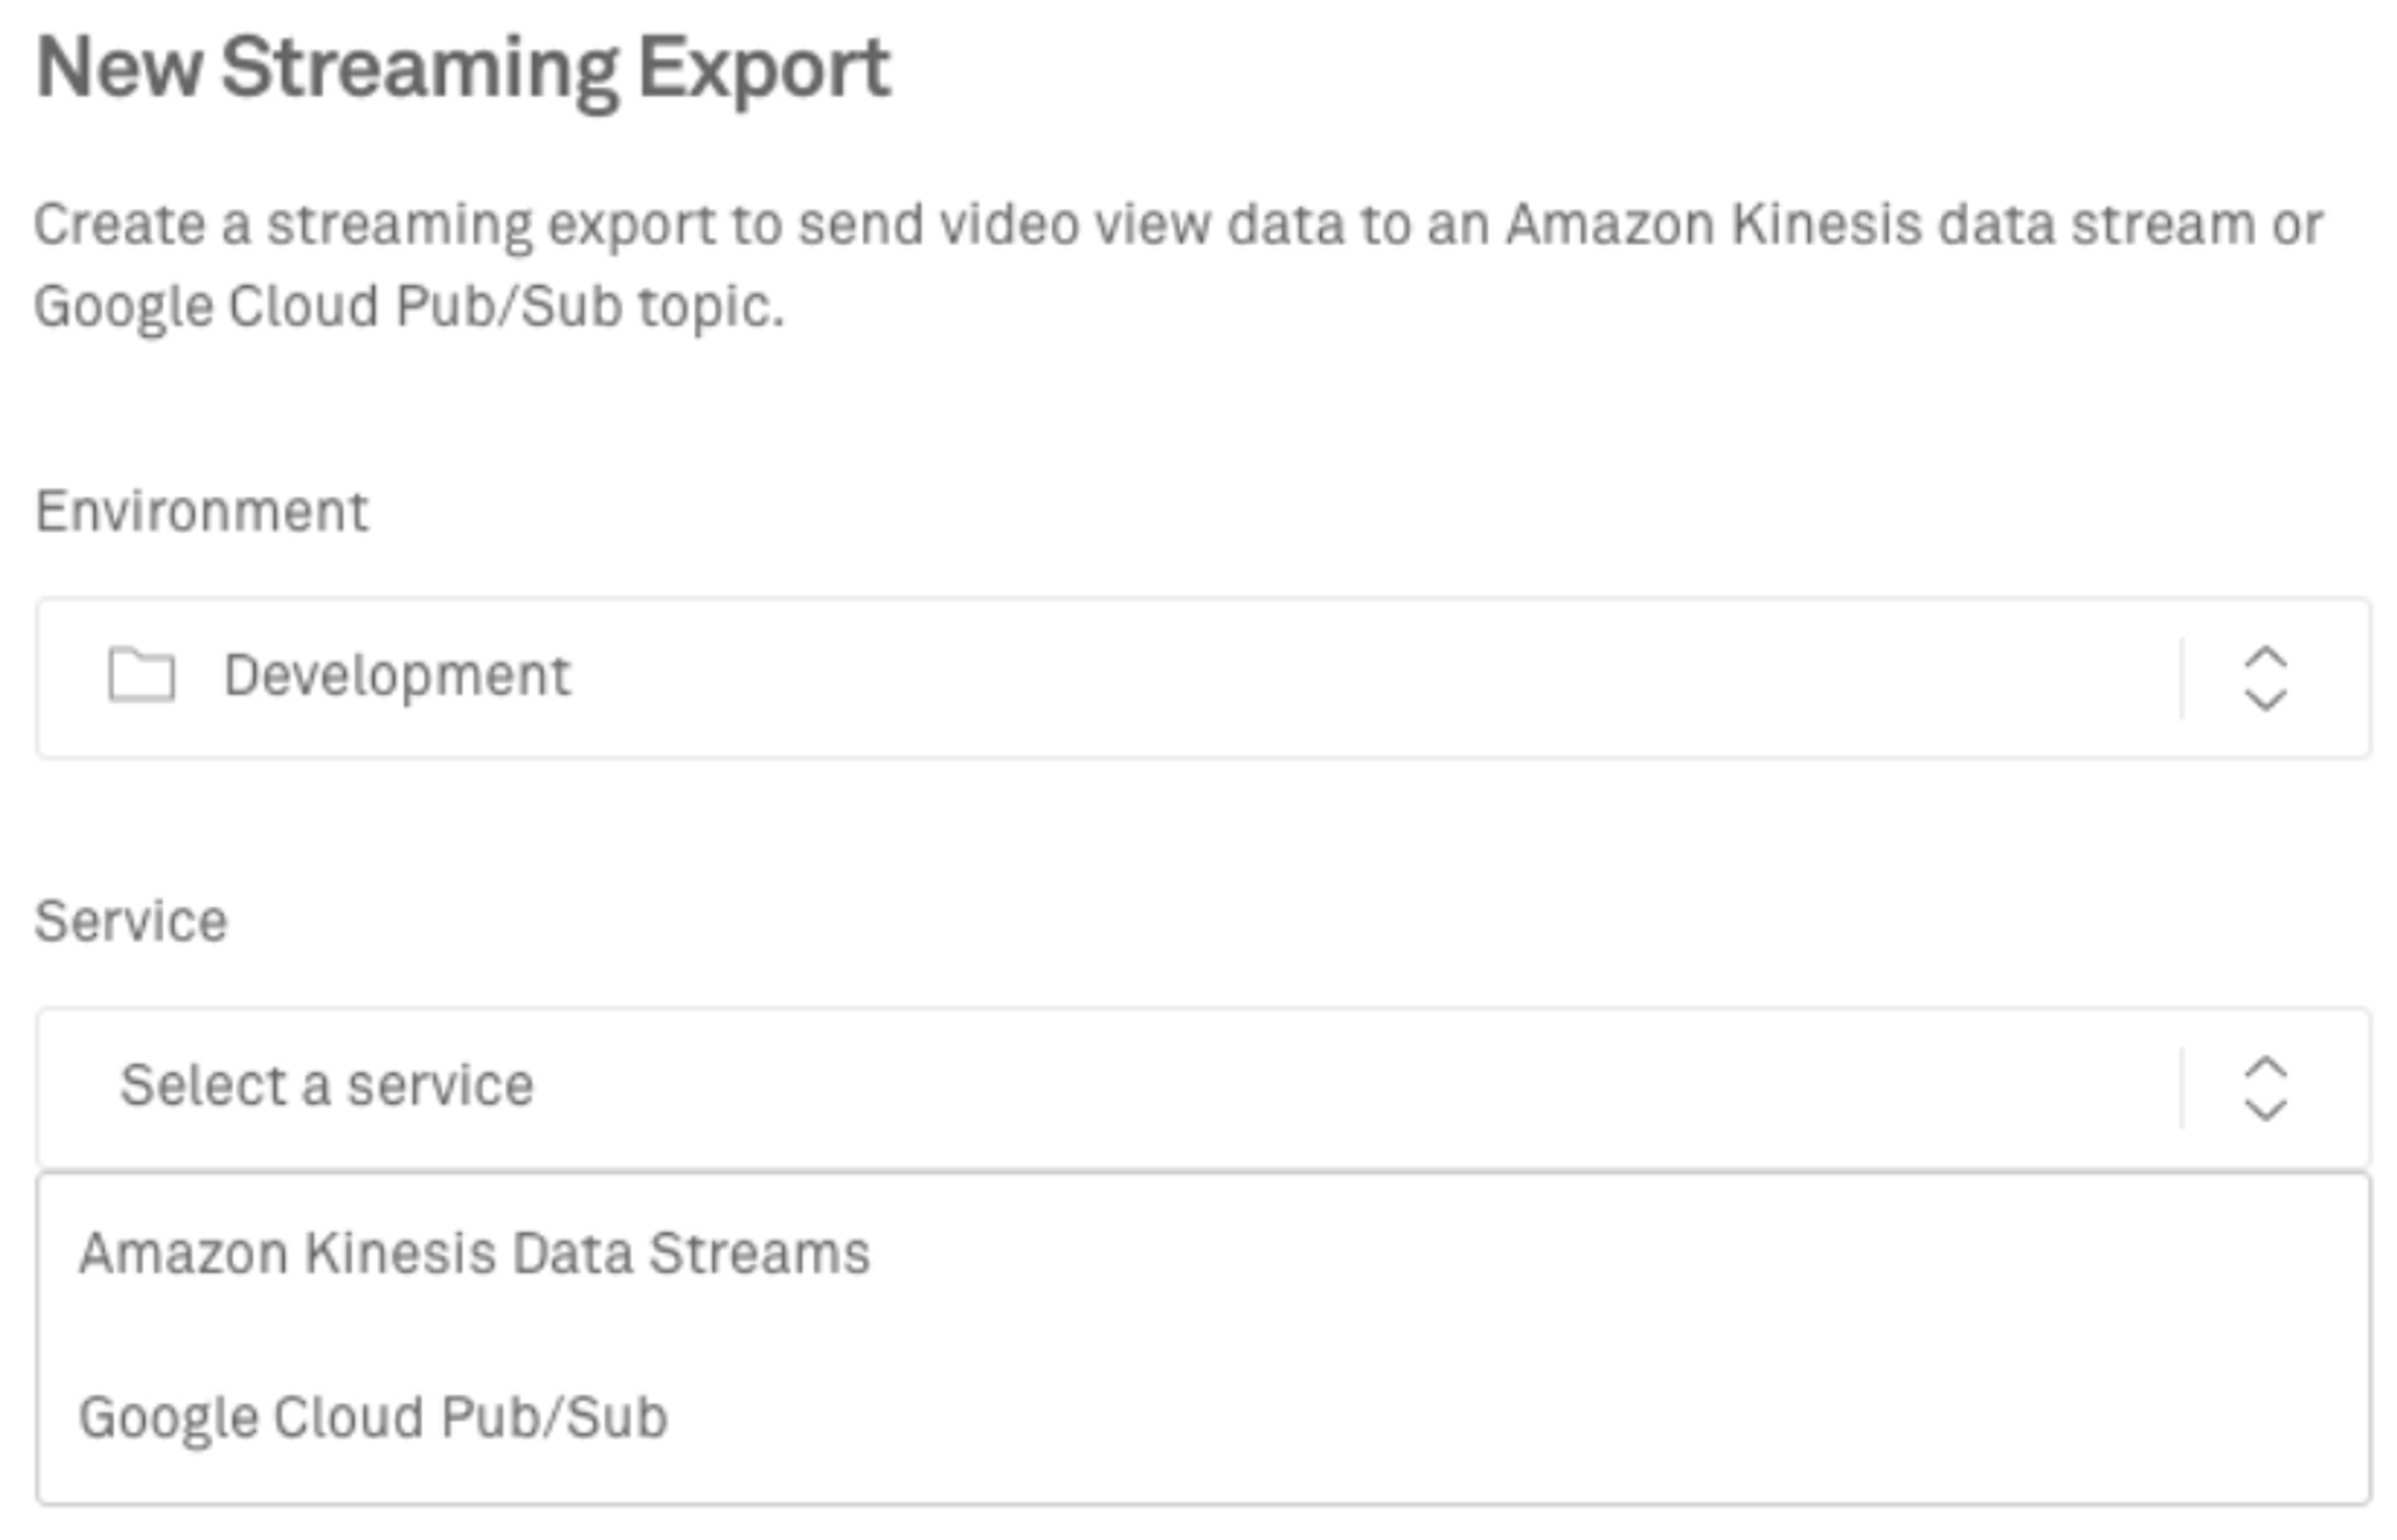 Image of new streaming export setup